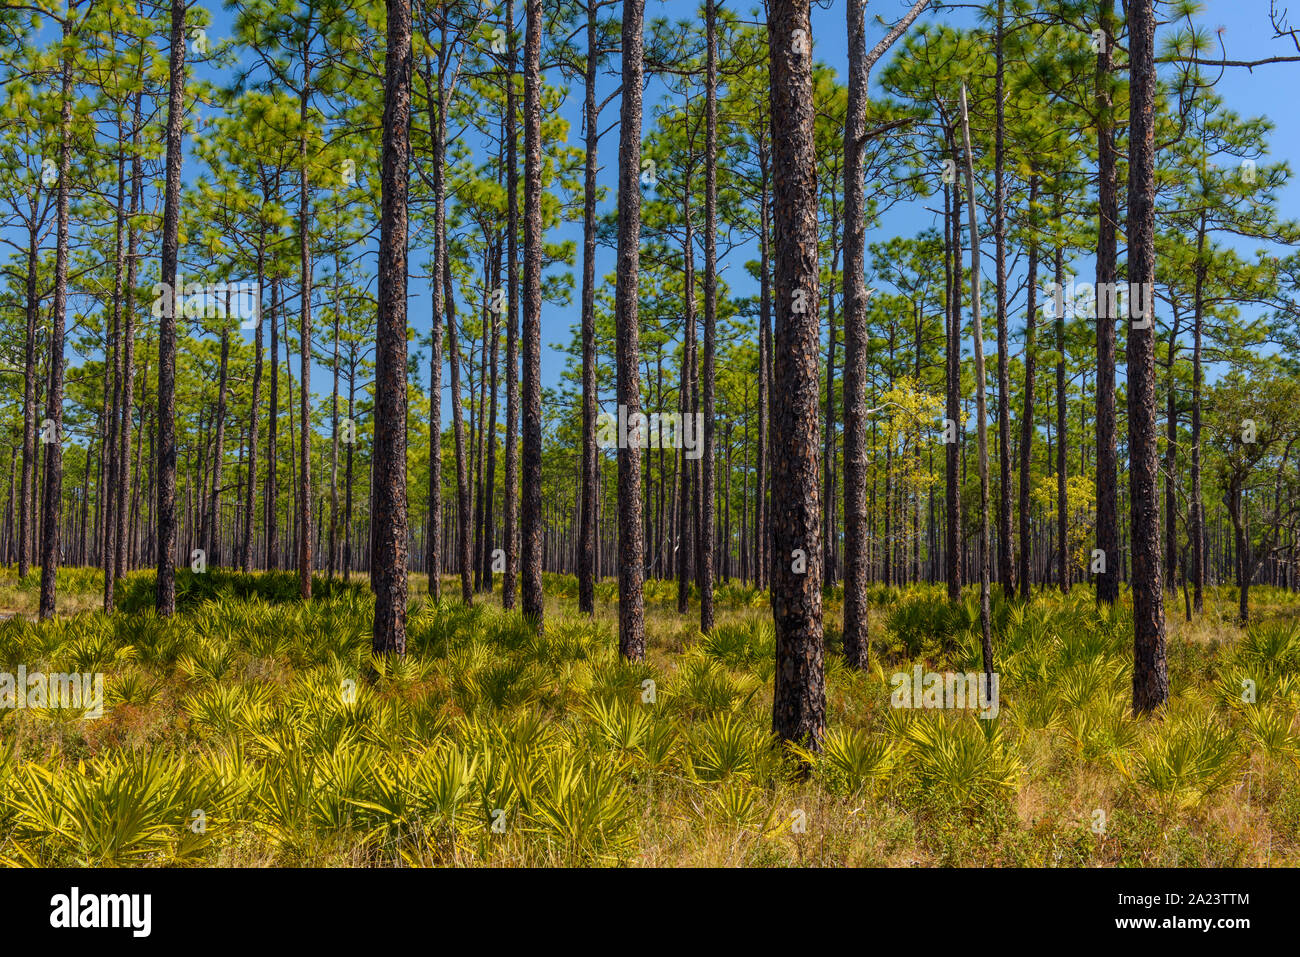 Saw palmetto in the understory of a Long leaf pine woodland, Ochlockonee River State Park, Florida, USA Stock Photo